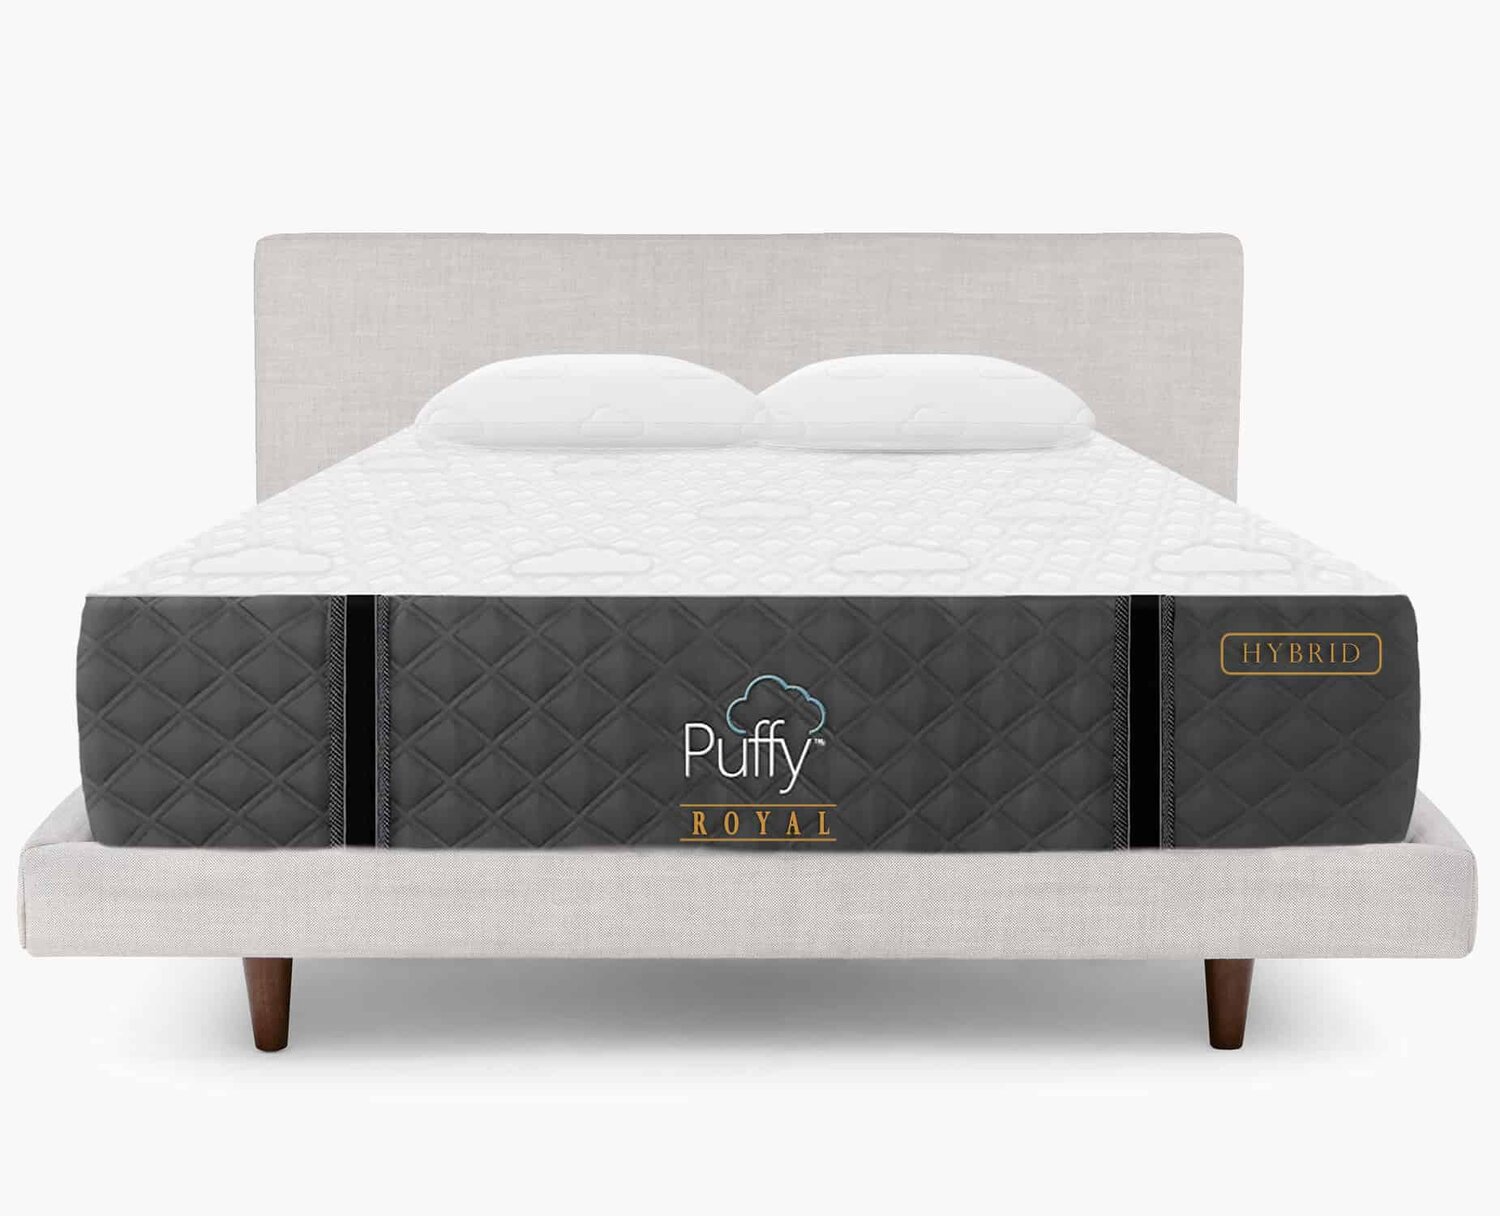 Puffy Royal Hybrid Review The Best, Bed Frames For Puffy Mattress